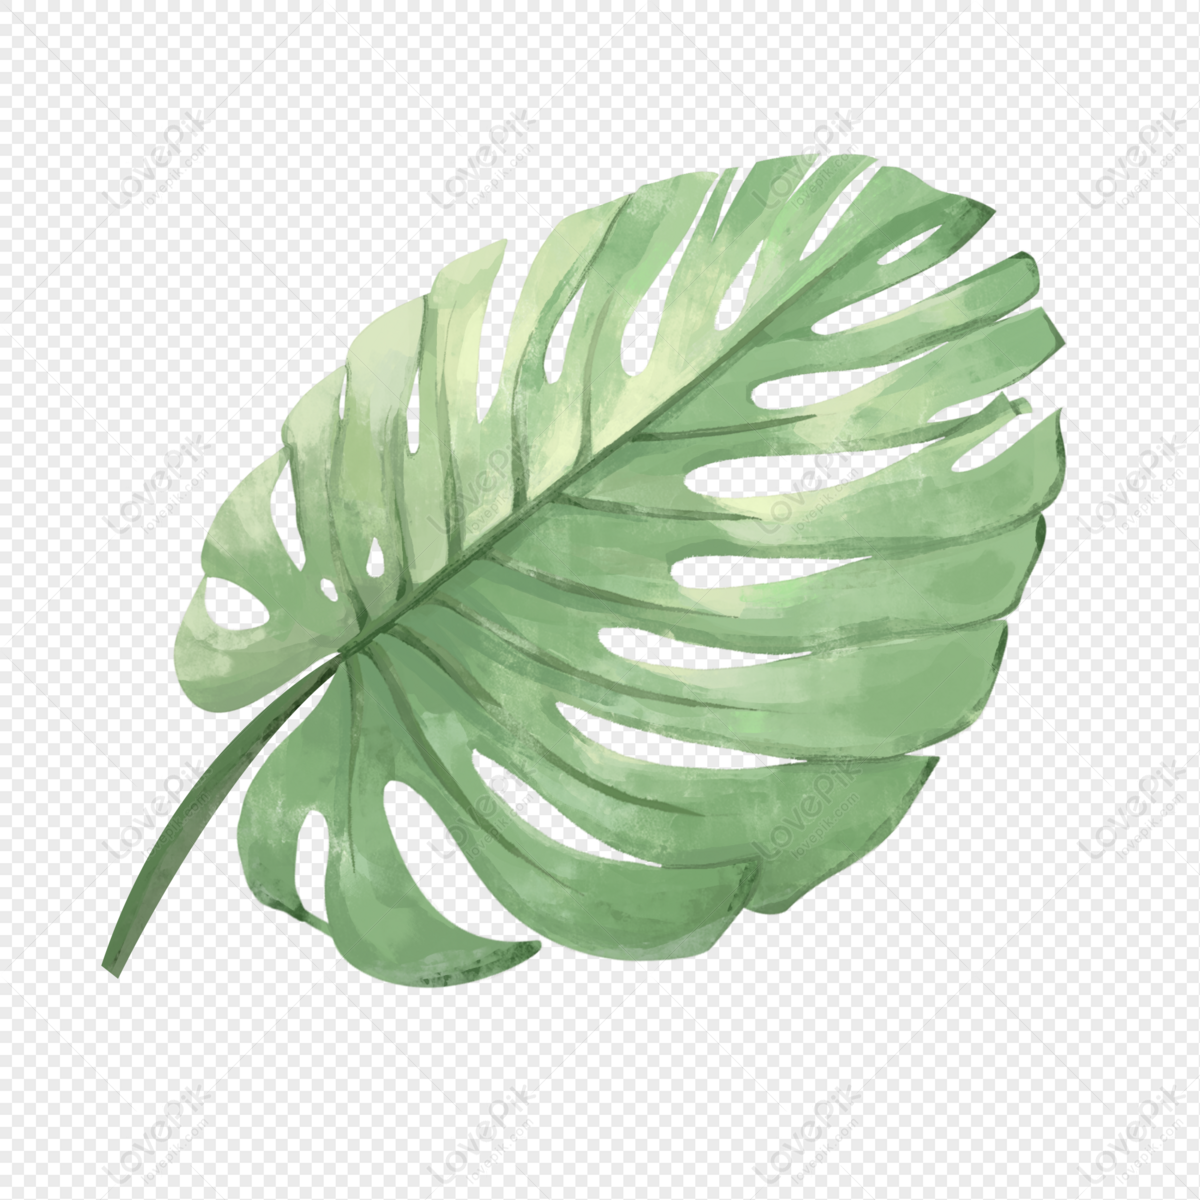 a-leaf-hand-drawn-leaves-leaf-pictures-plant-png-image-free-download